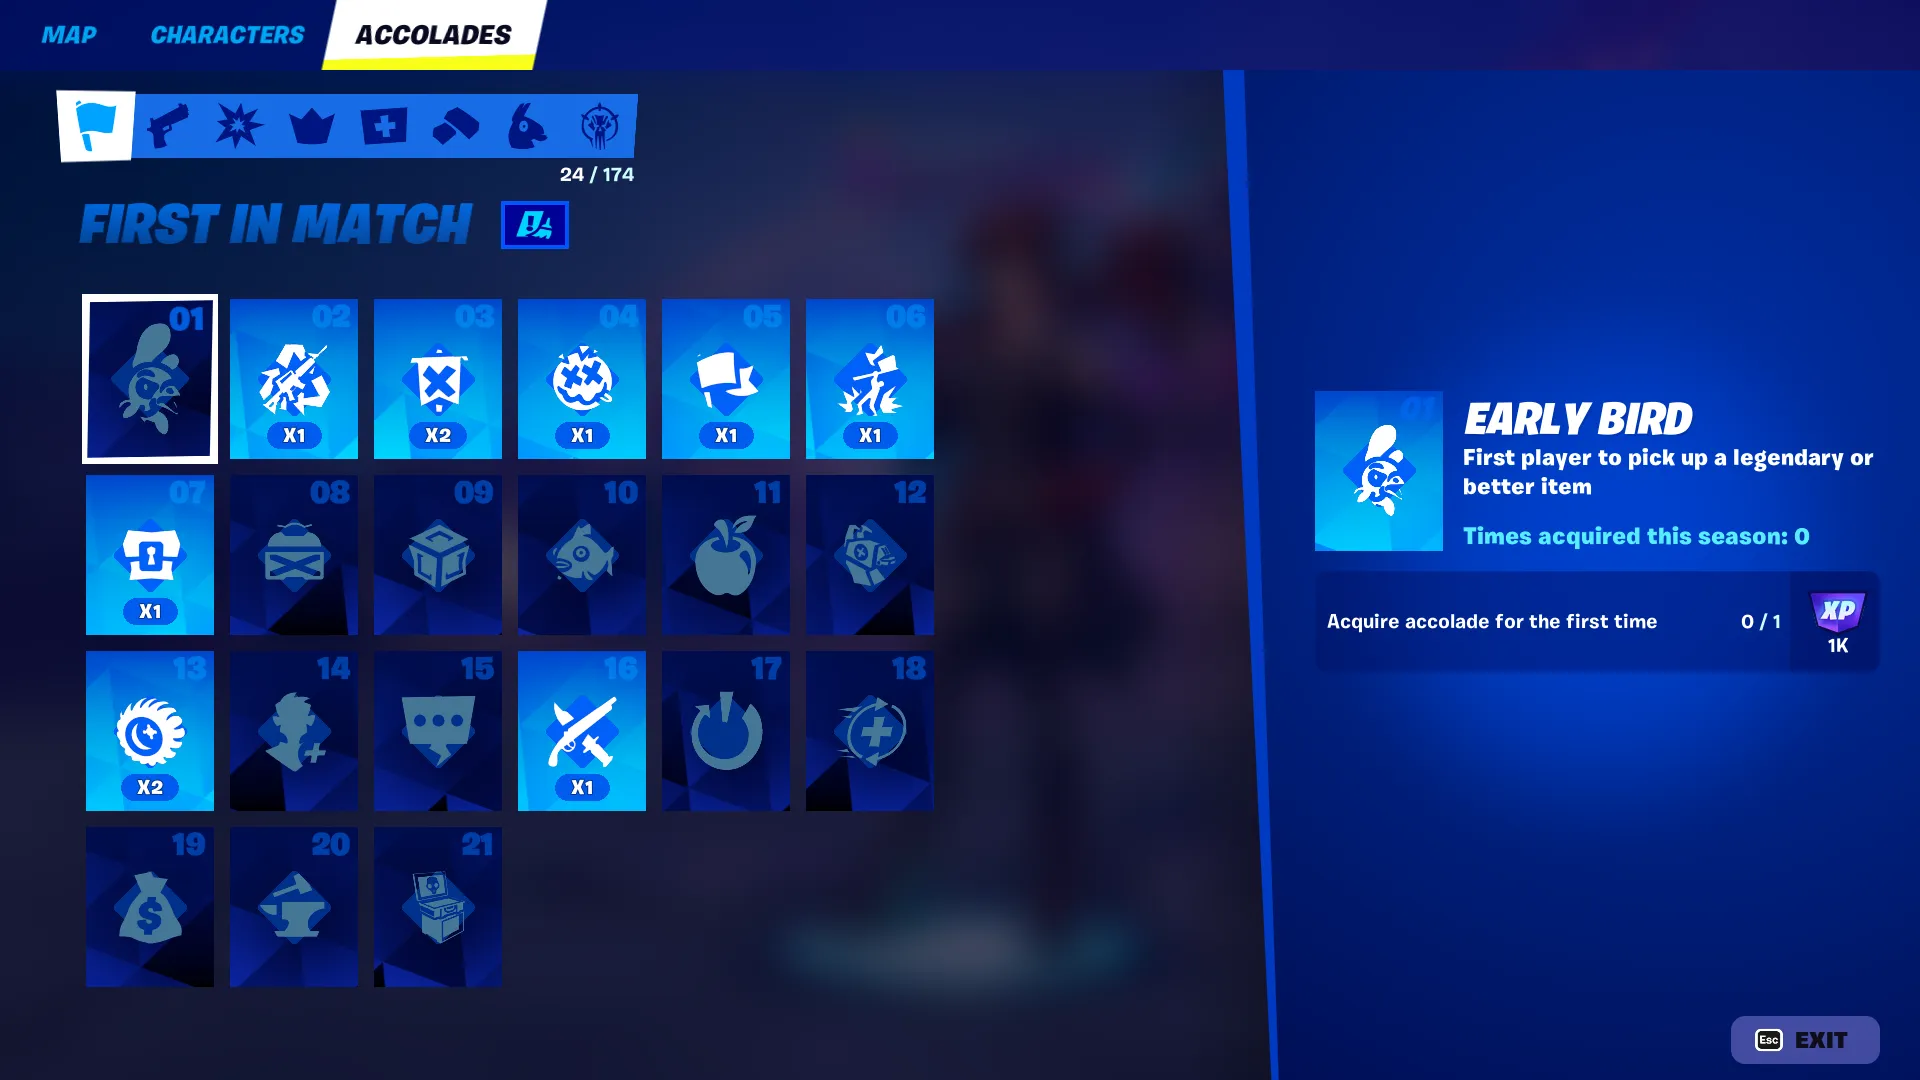 How to Open Collections and View Accolades in Fortnite